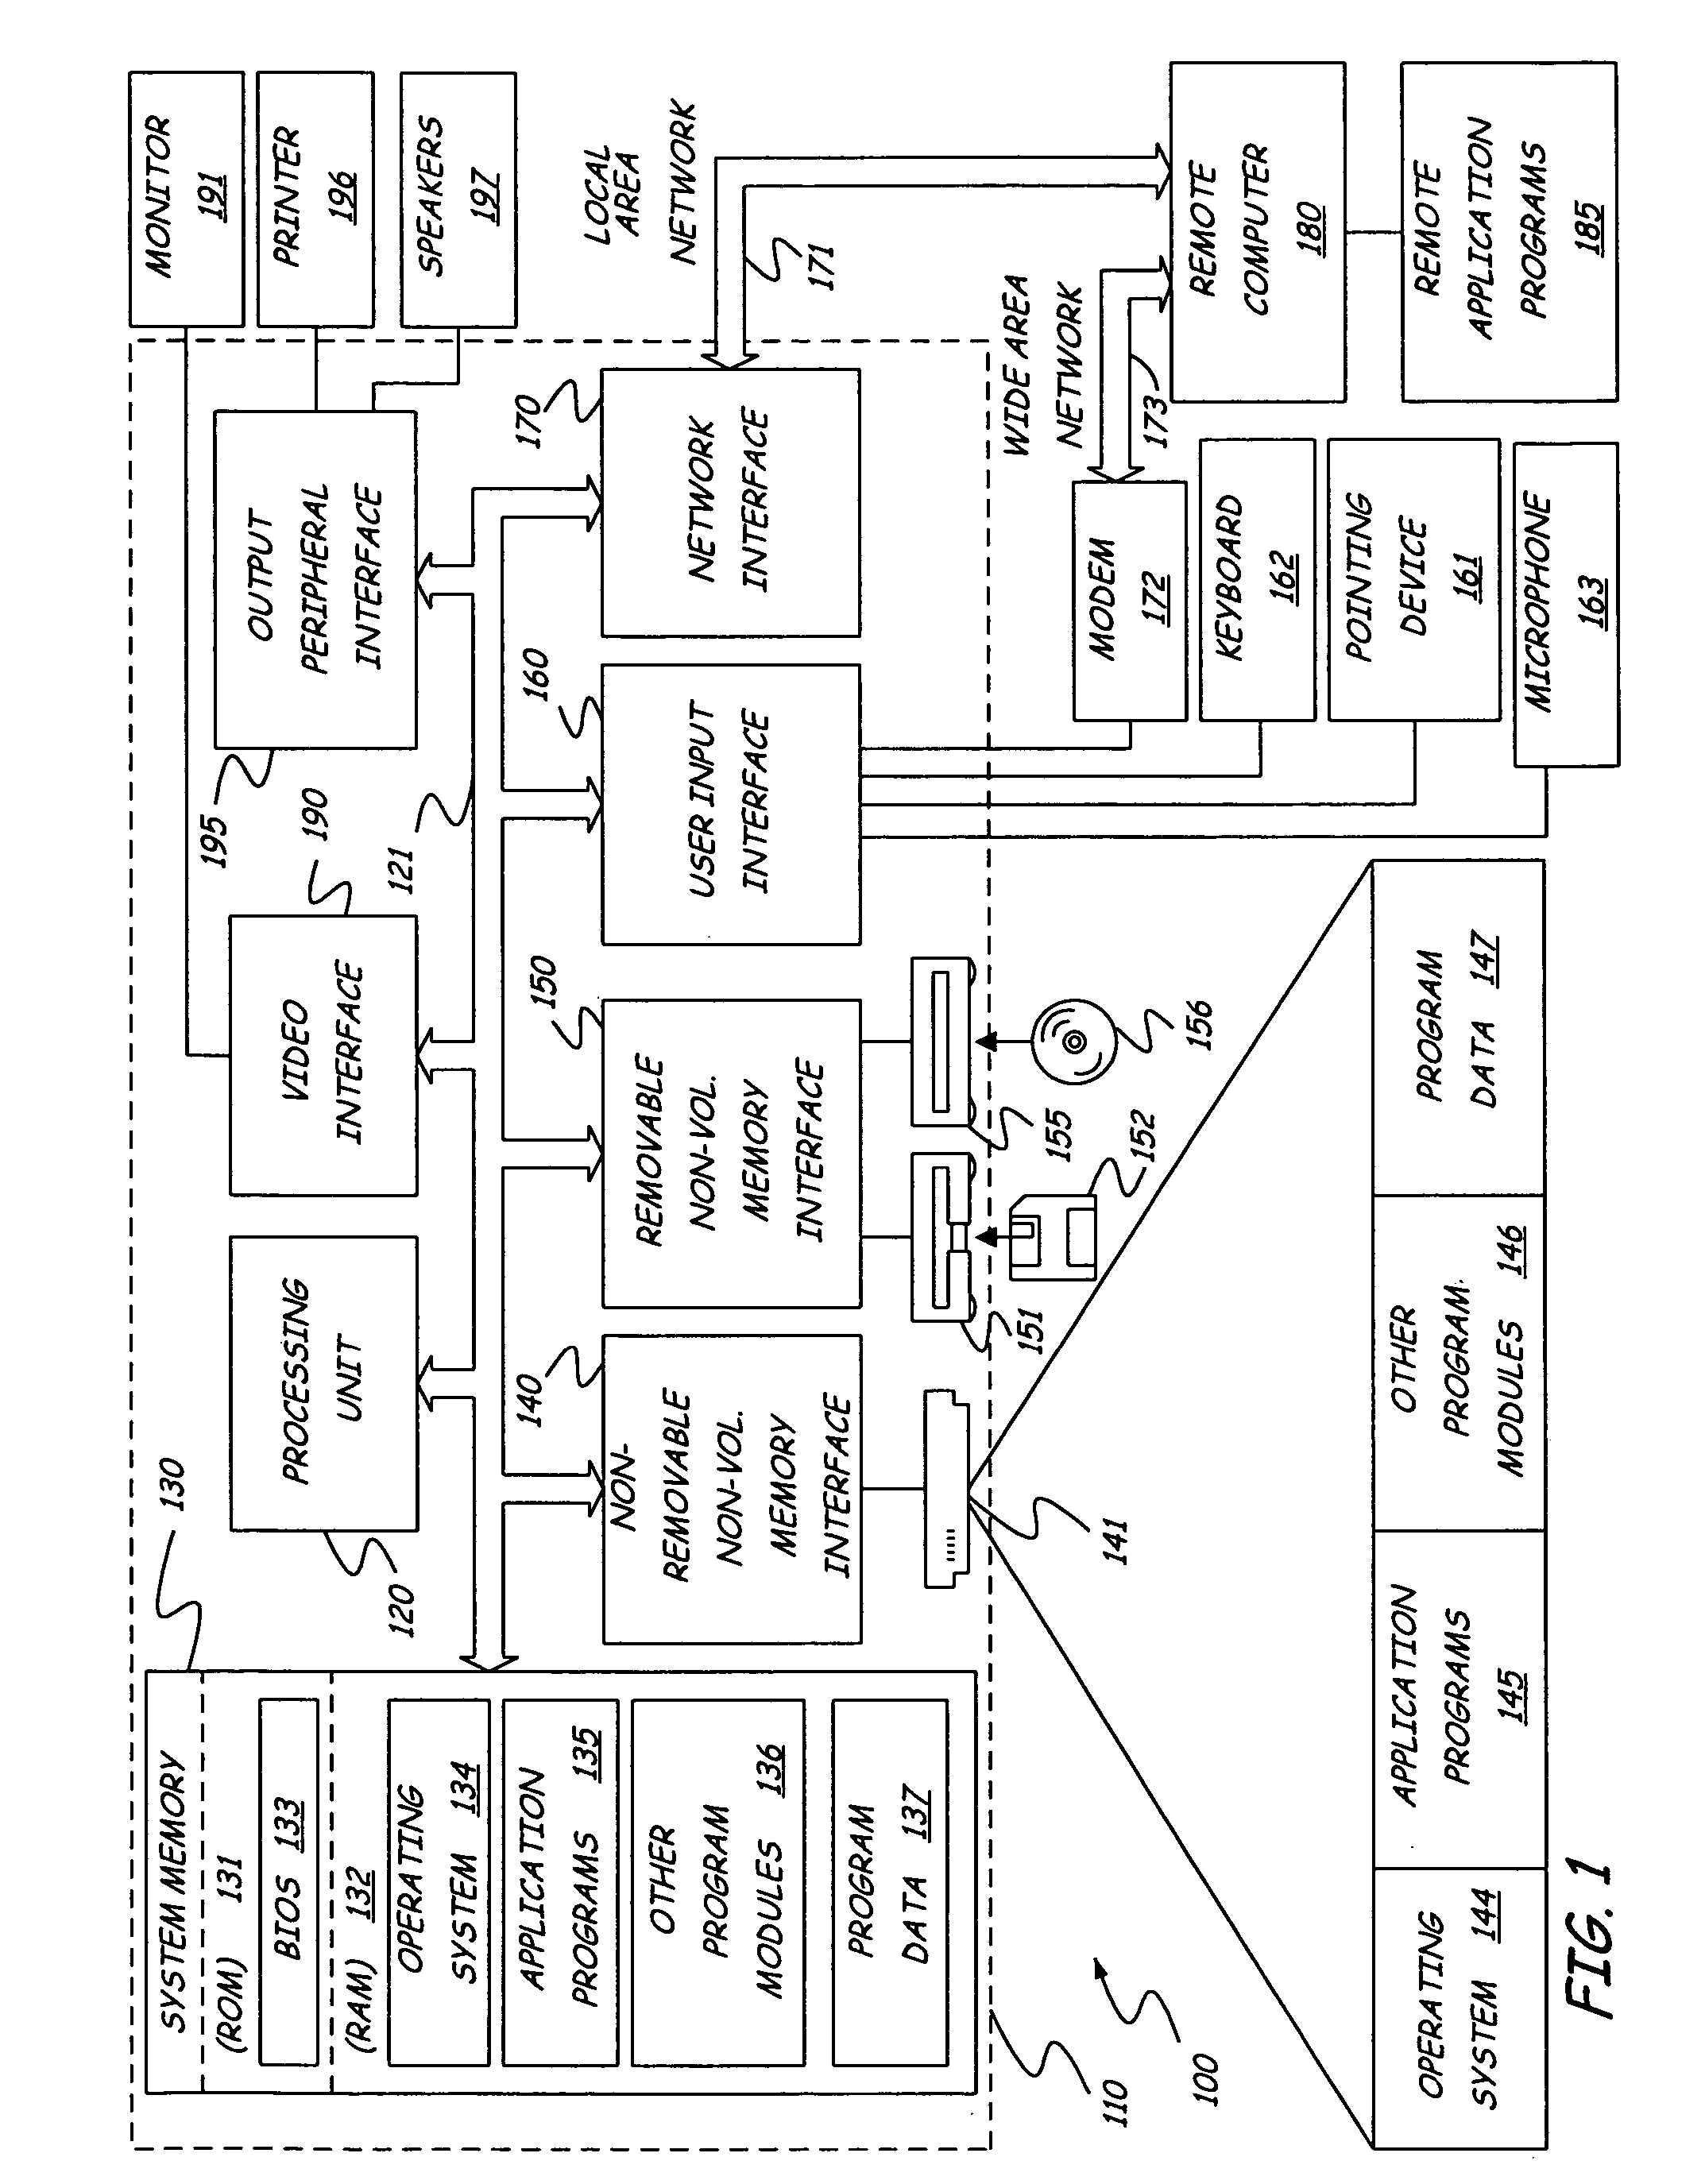 Text mining apparatus and associated methods